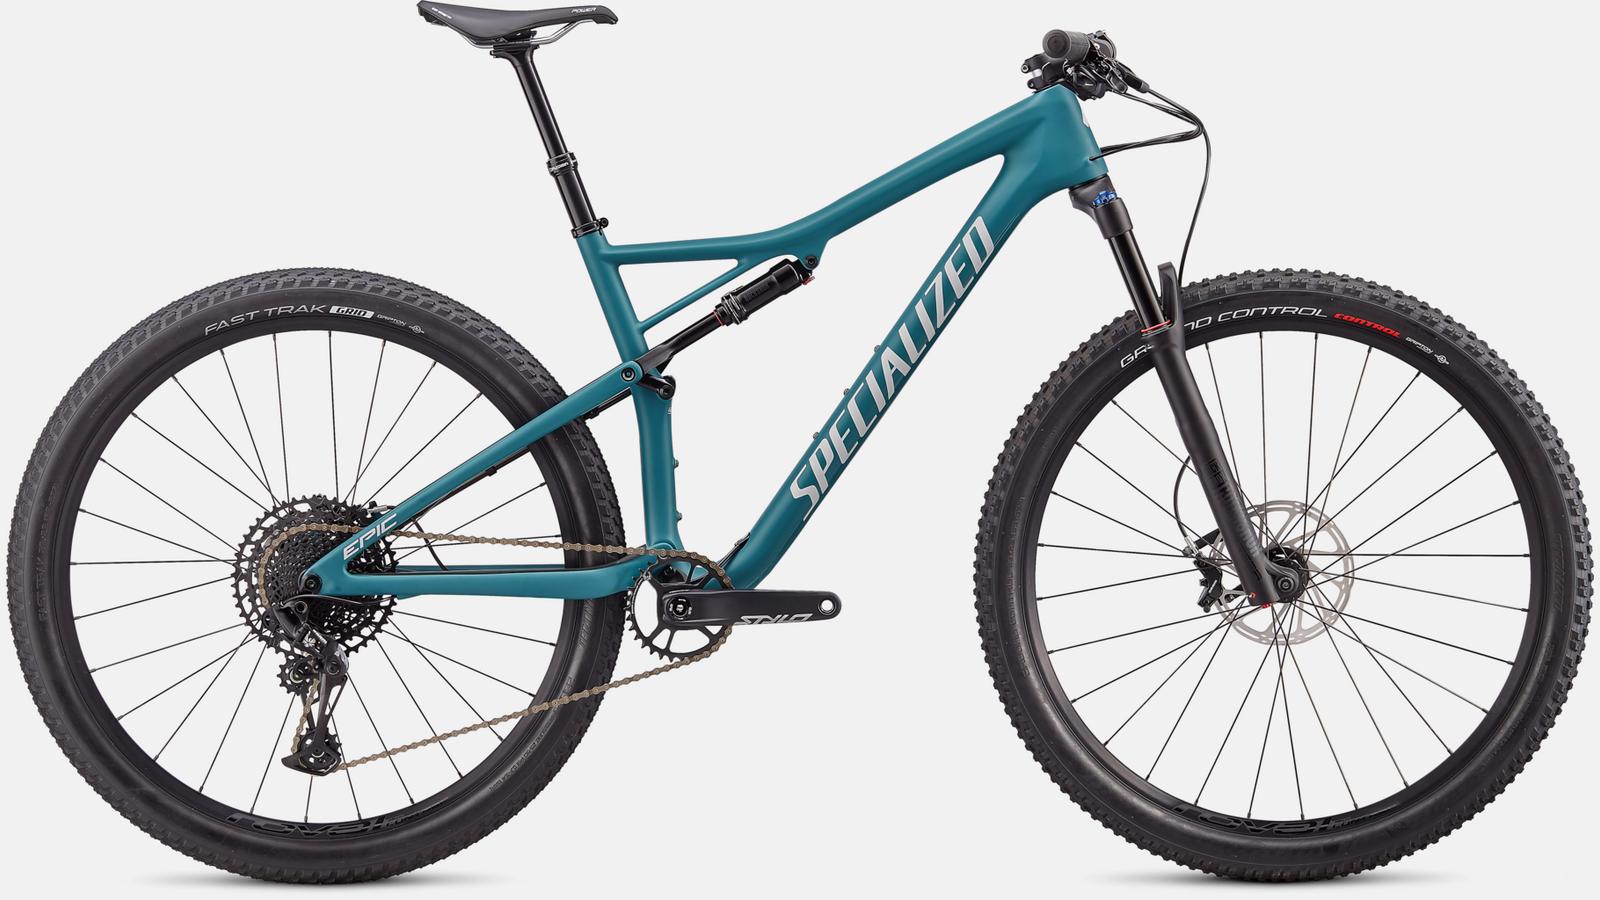 Paint for 2020 Specialized Epic Comp Carbon EVO - Satin Dusty Turquoise